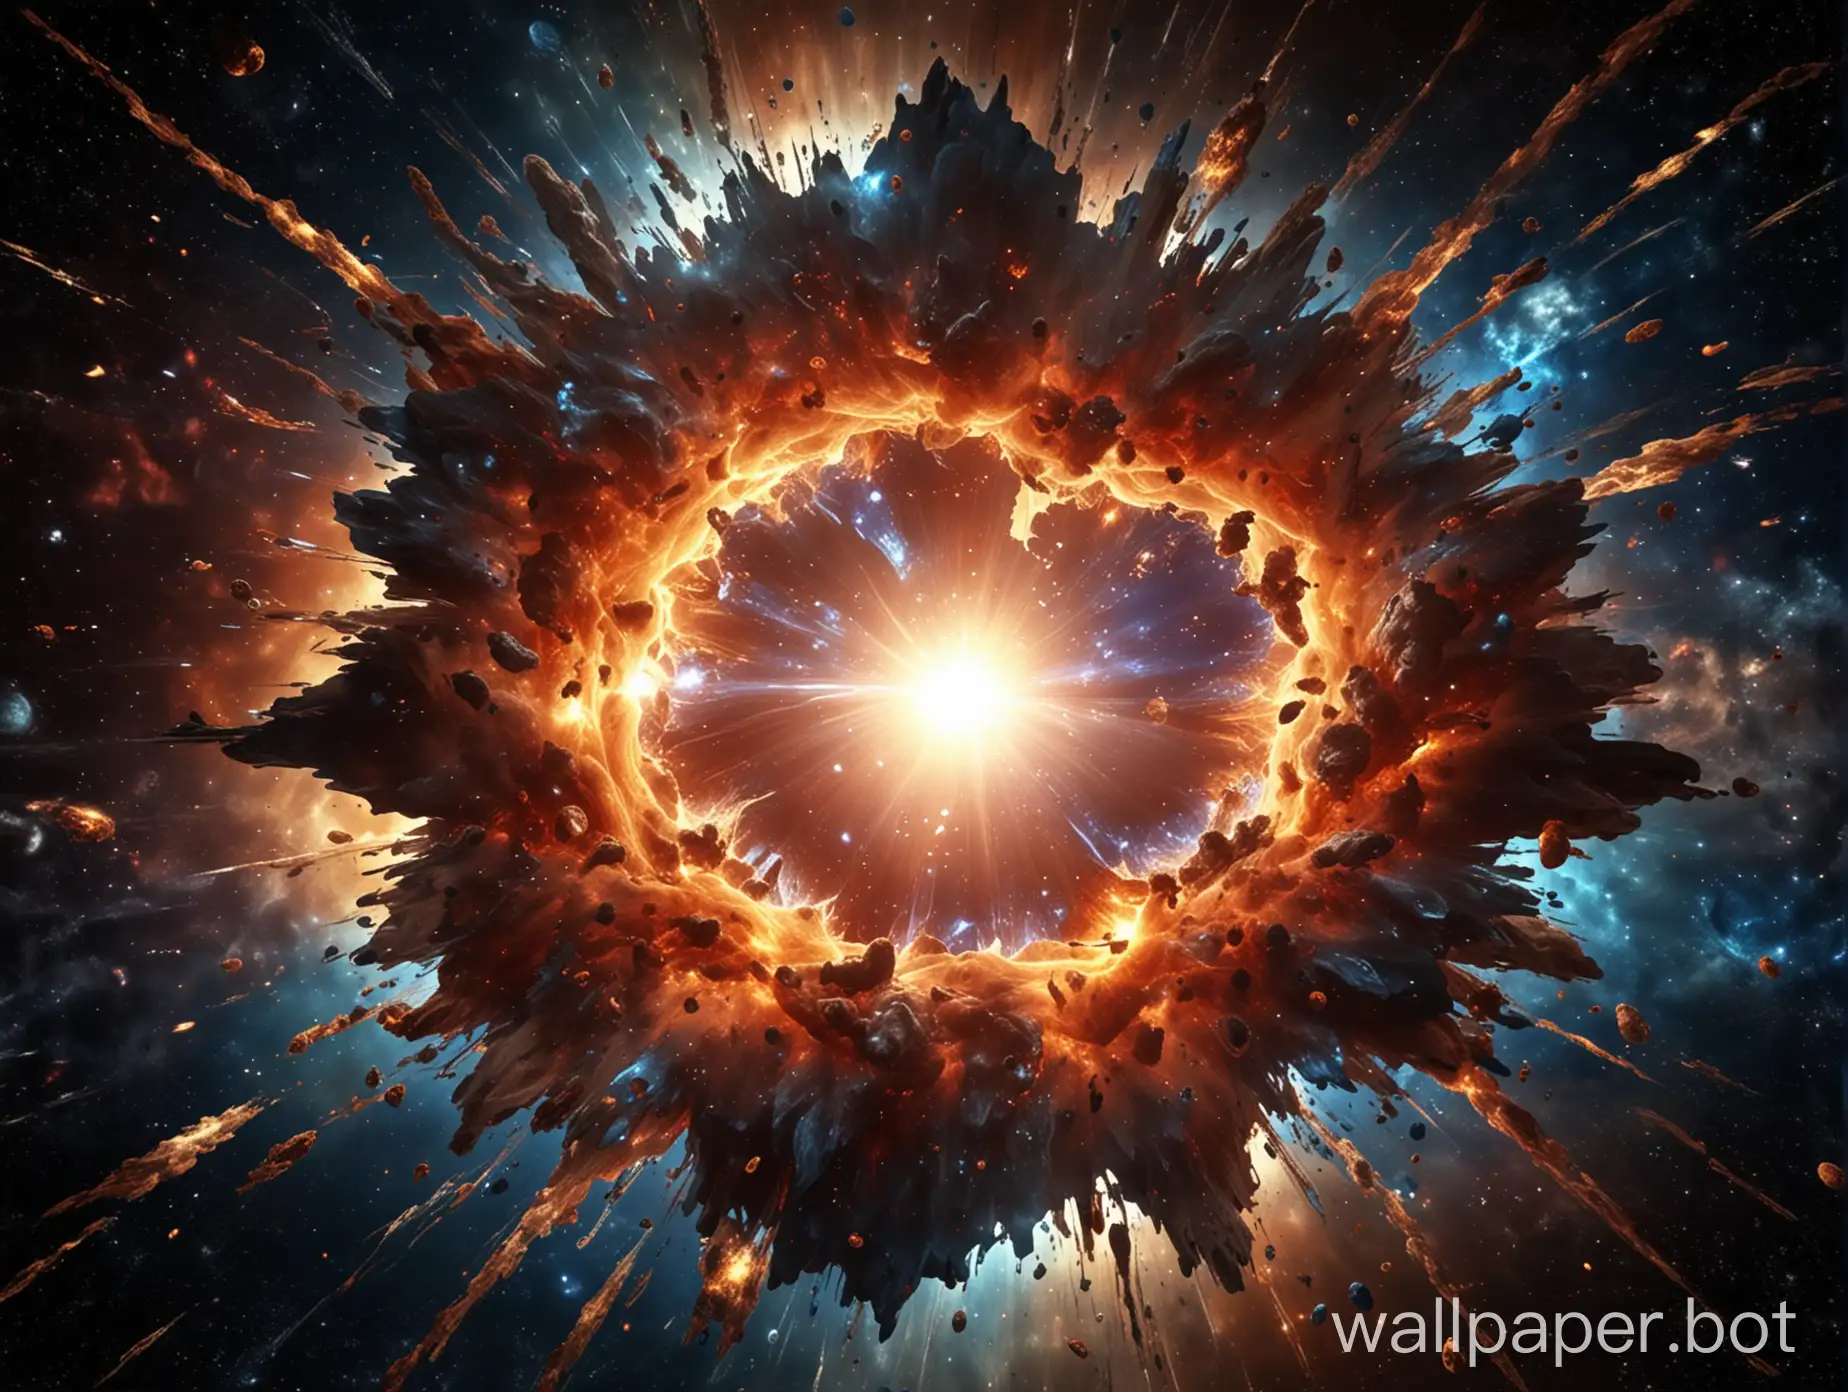 Vivid-Cosmic-Explosion-Captured-Within-HighQuality-and-HighDefinition-Imagery